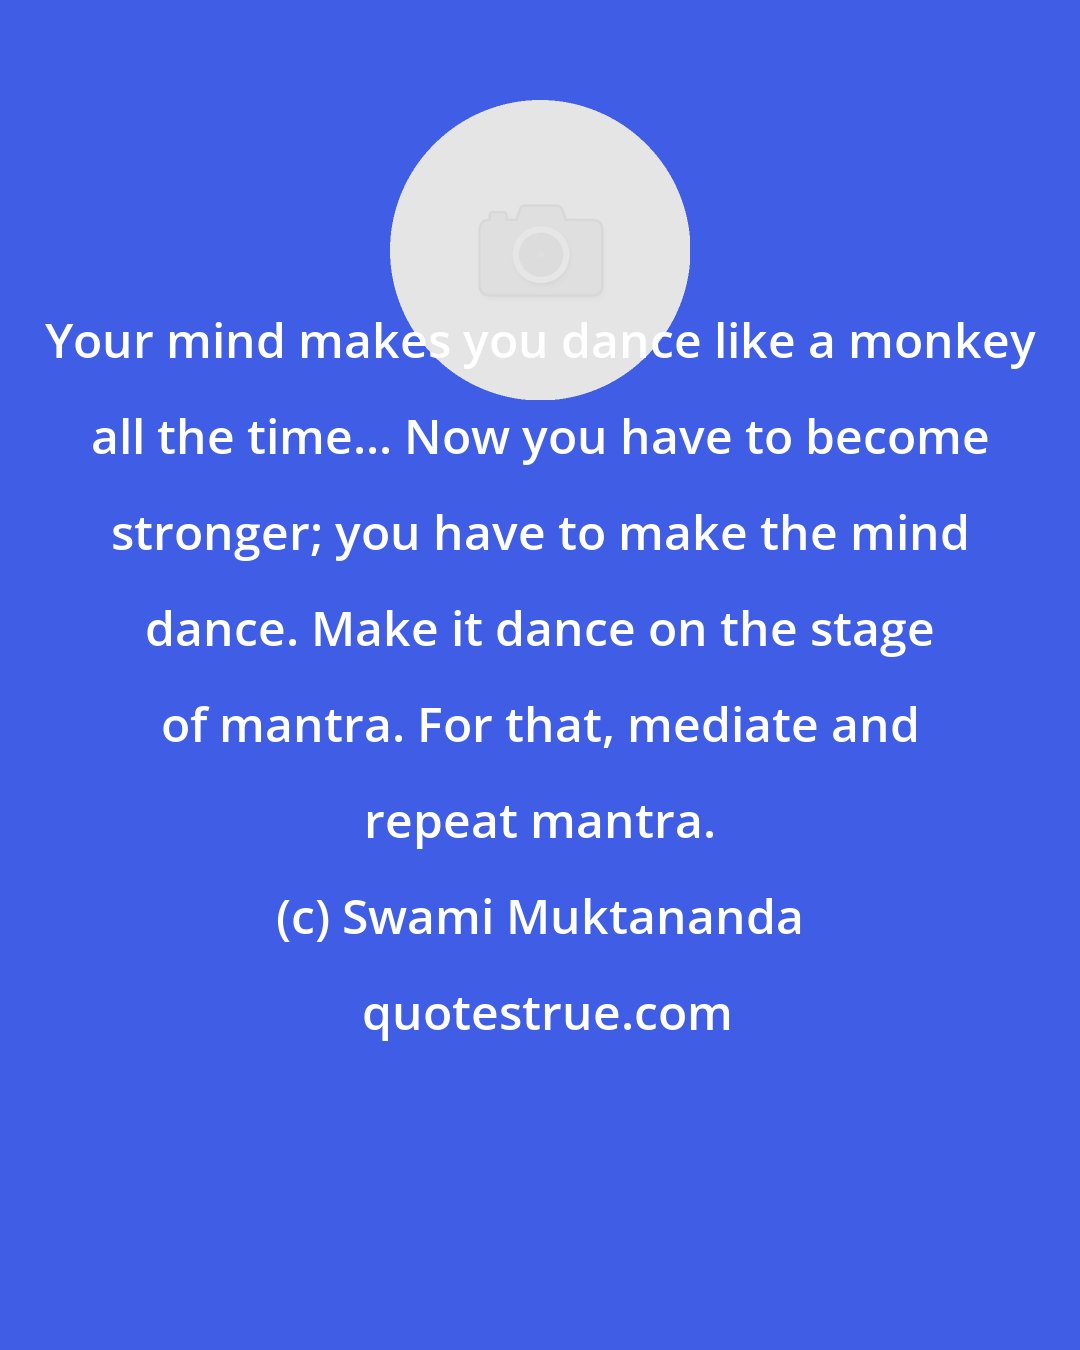 Swami Muktananda: Your mind makes you dance like a monkey all the time... Now you have to become stronger; you have to make the mind dance. Make it dance on the stage of mantra. For that, mediate and repeat mantra.